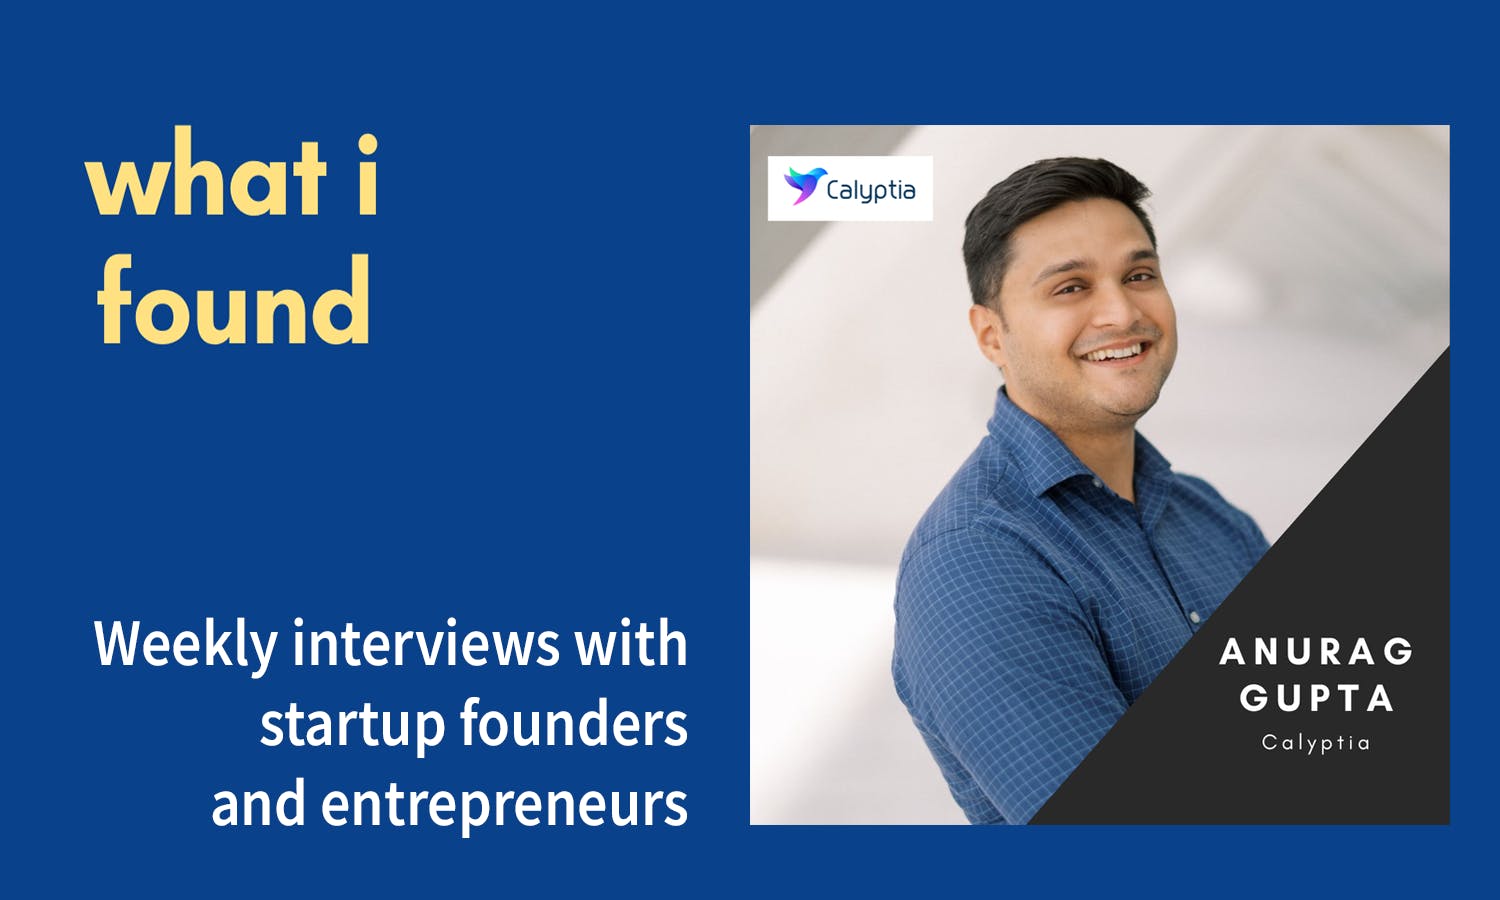 What I found: Weekly Interviews with startup founders and entrepreneurs